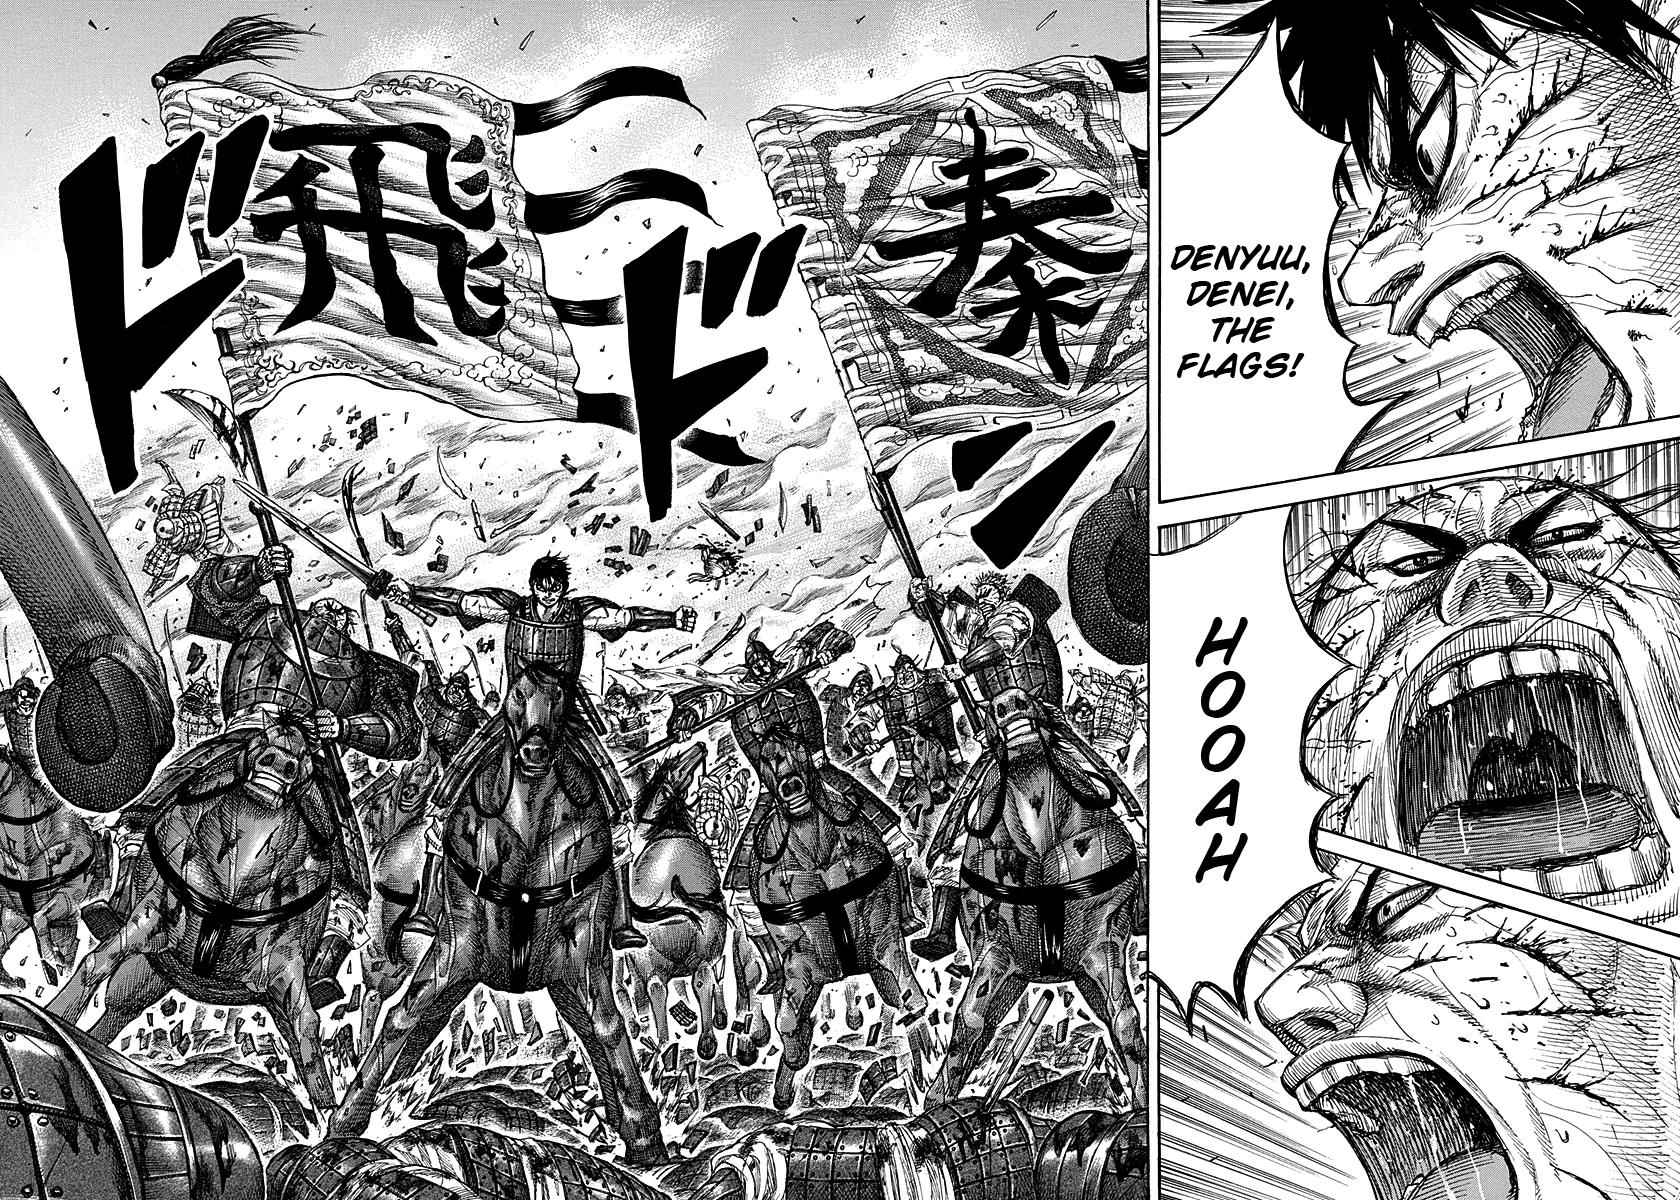 You are reading Kingdom manga chapter 274 in English. 